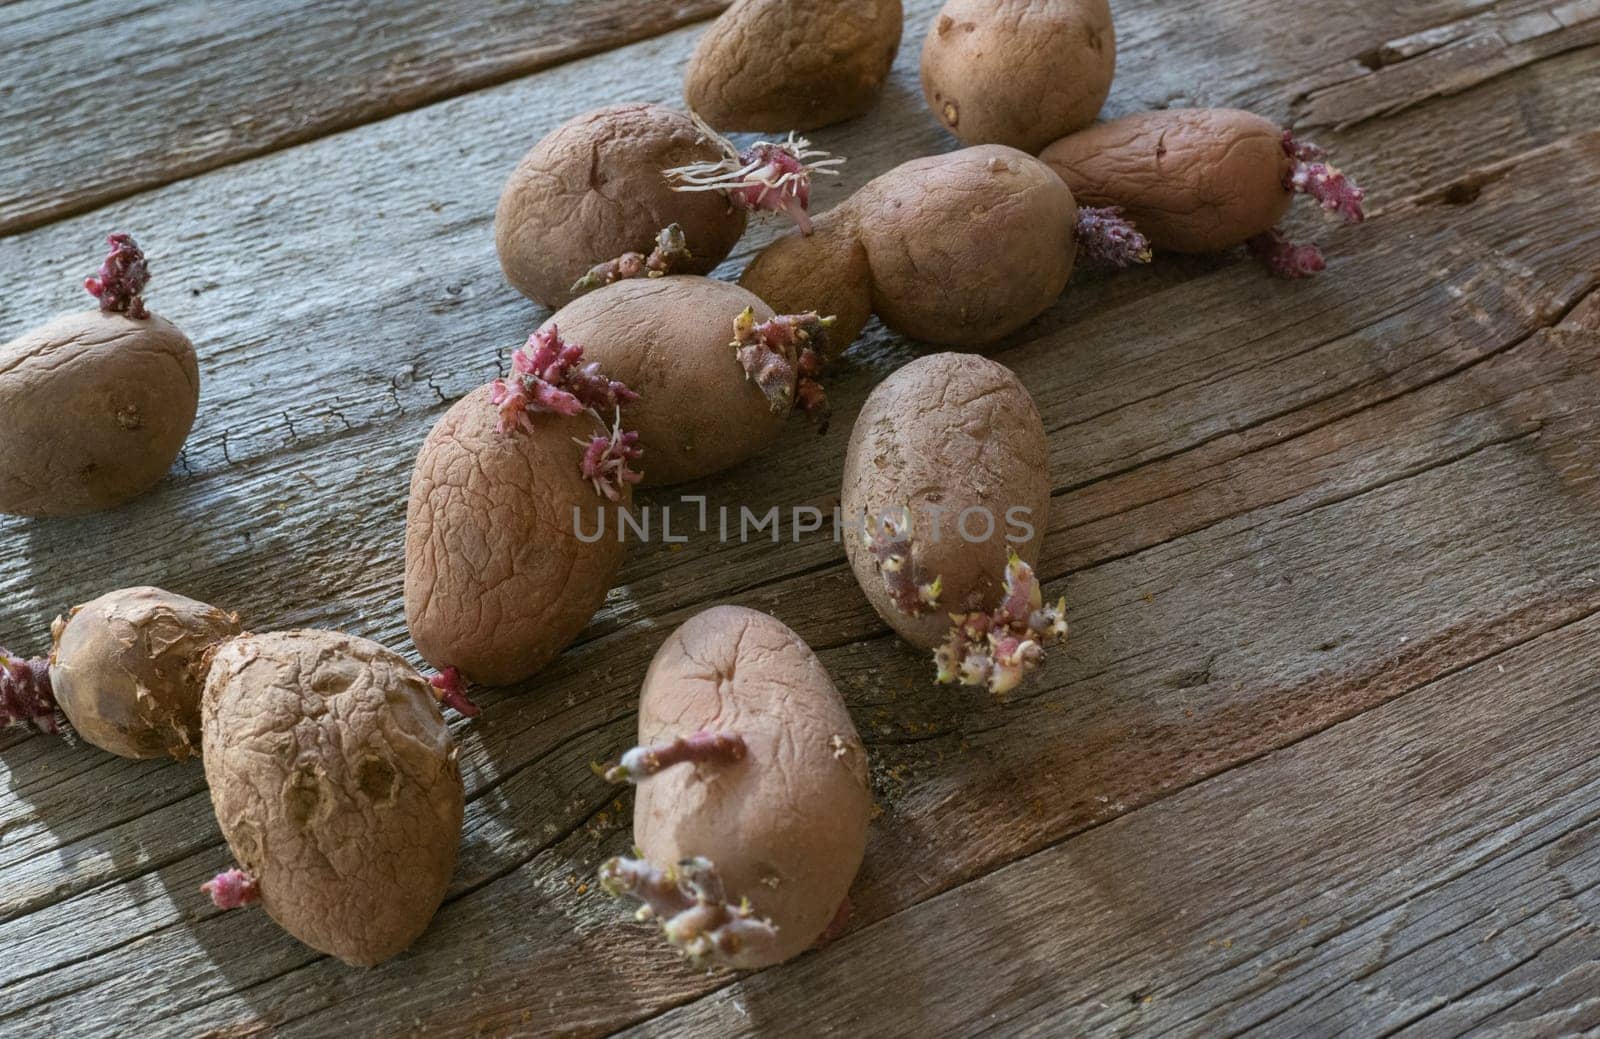 Potatoes with sprouts on a wooden background. Seed potatoes for planting. by Ekaterina34